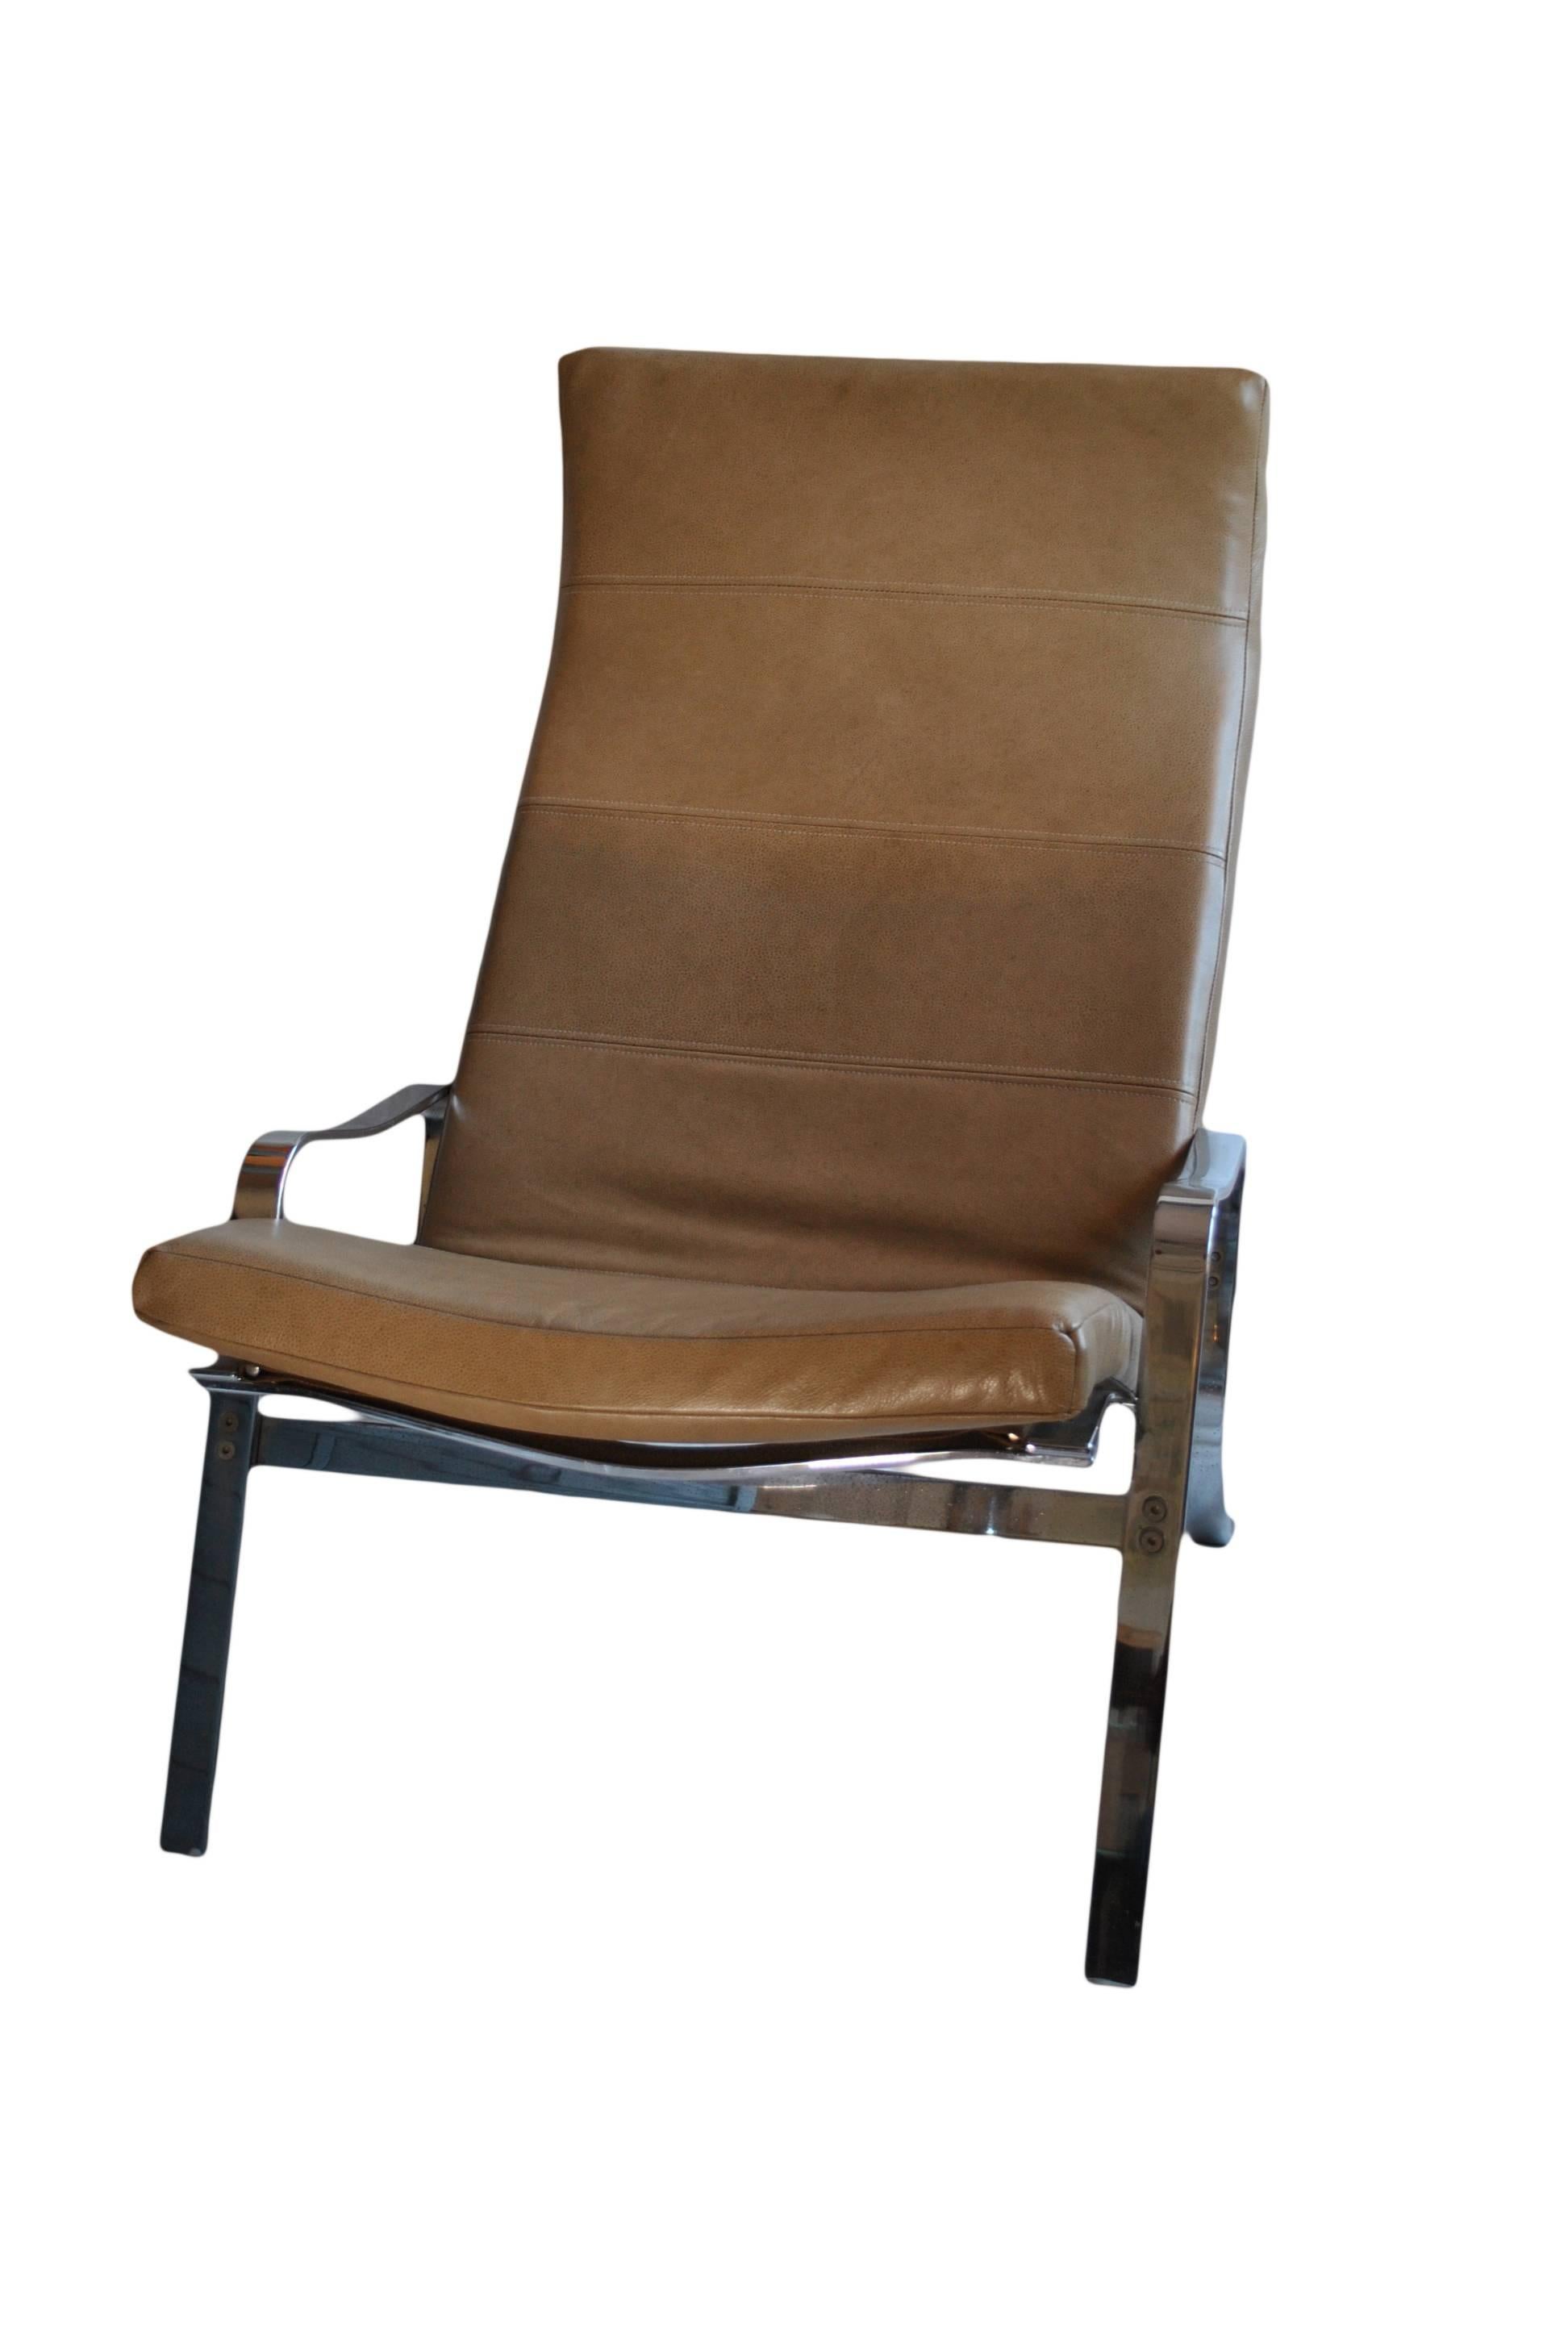 20th Century Arne Norell Style Midcentury Lounge Chair